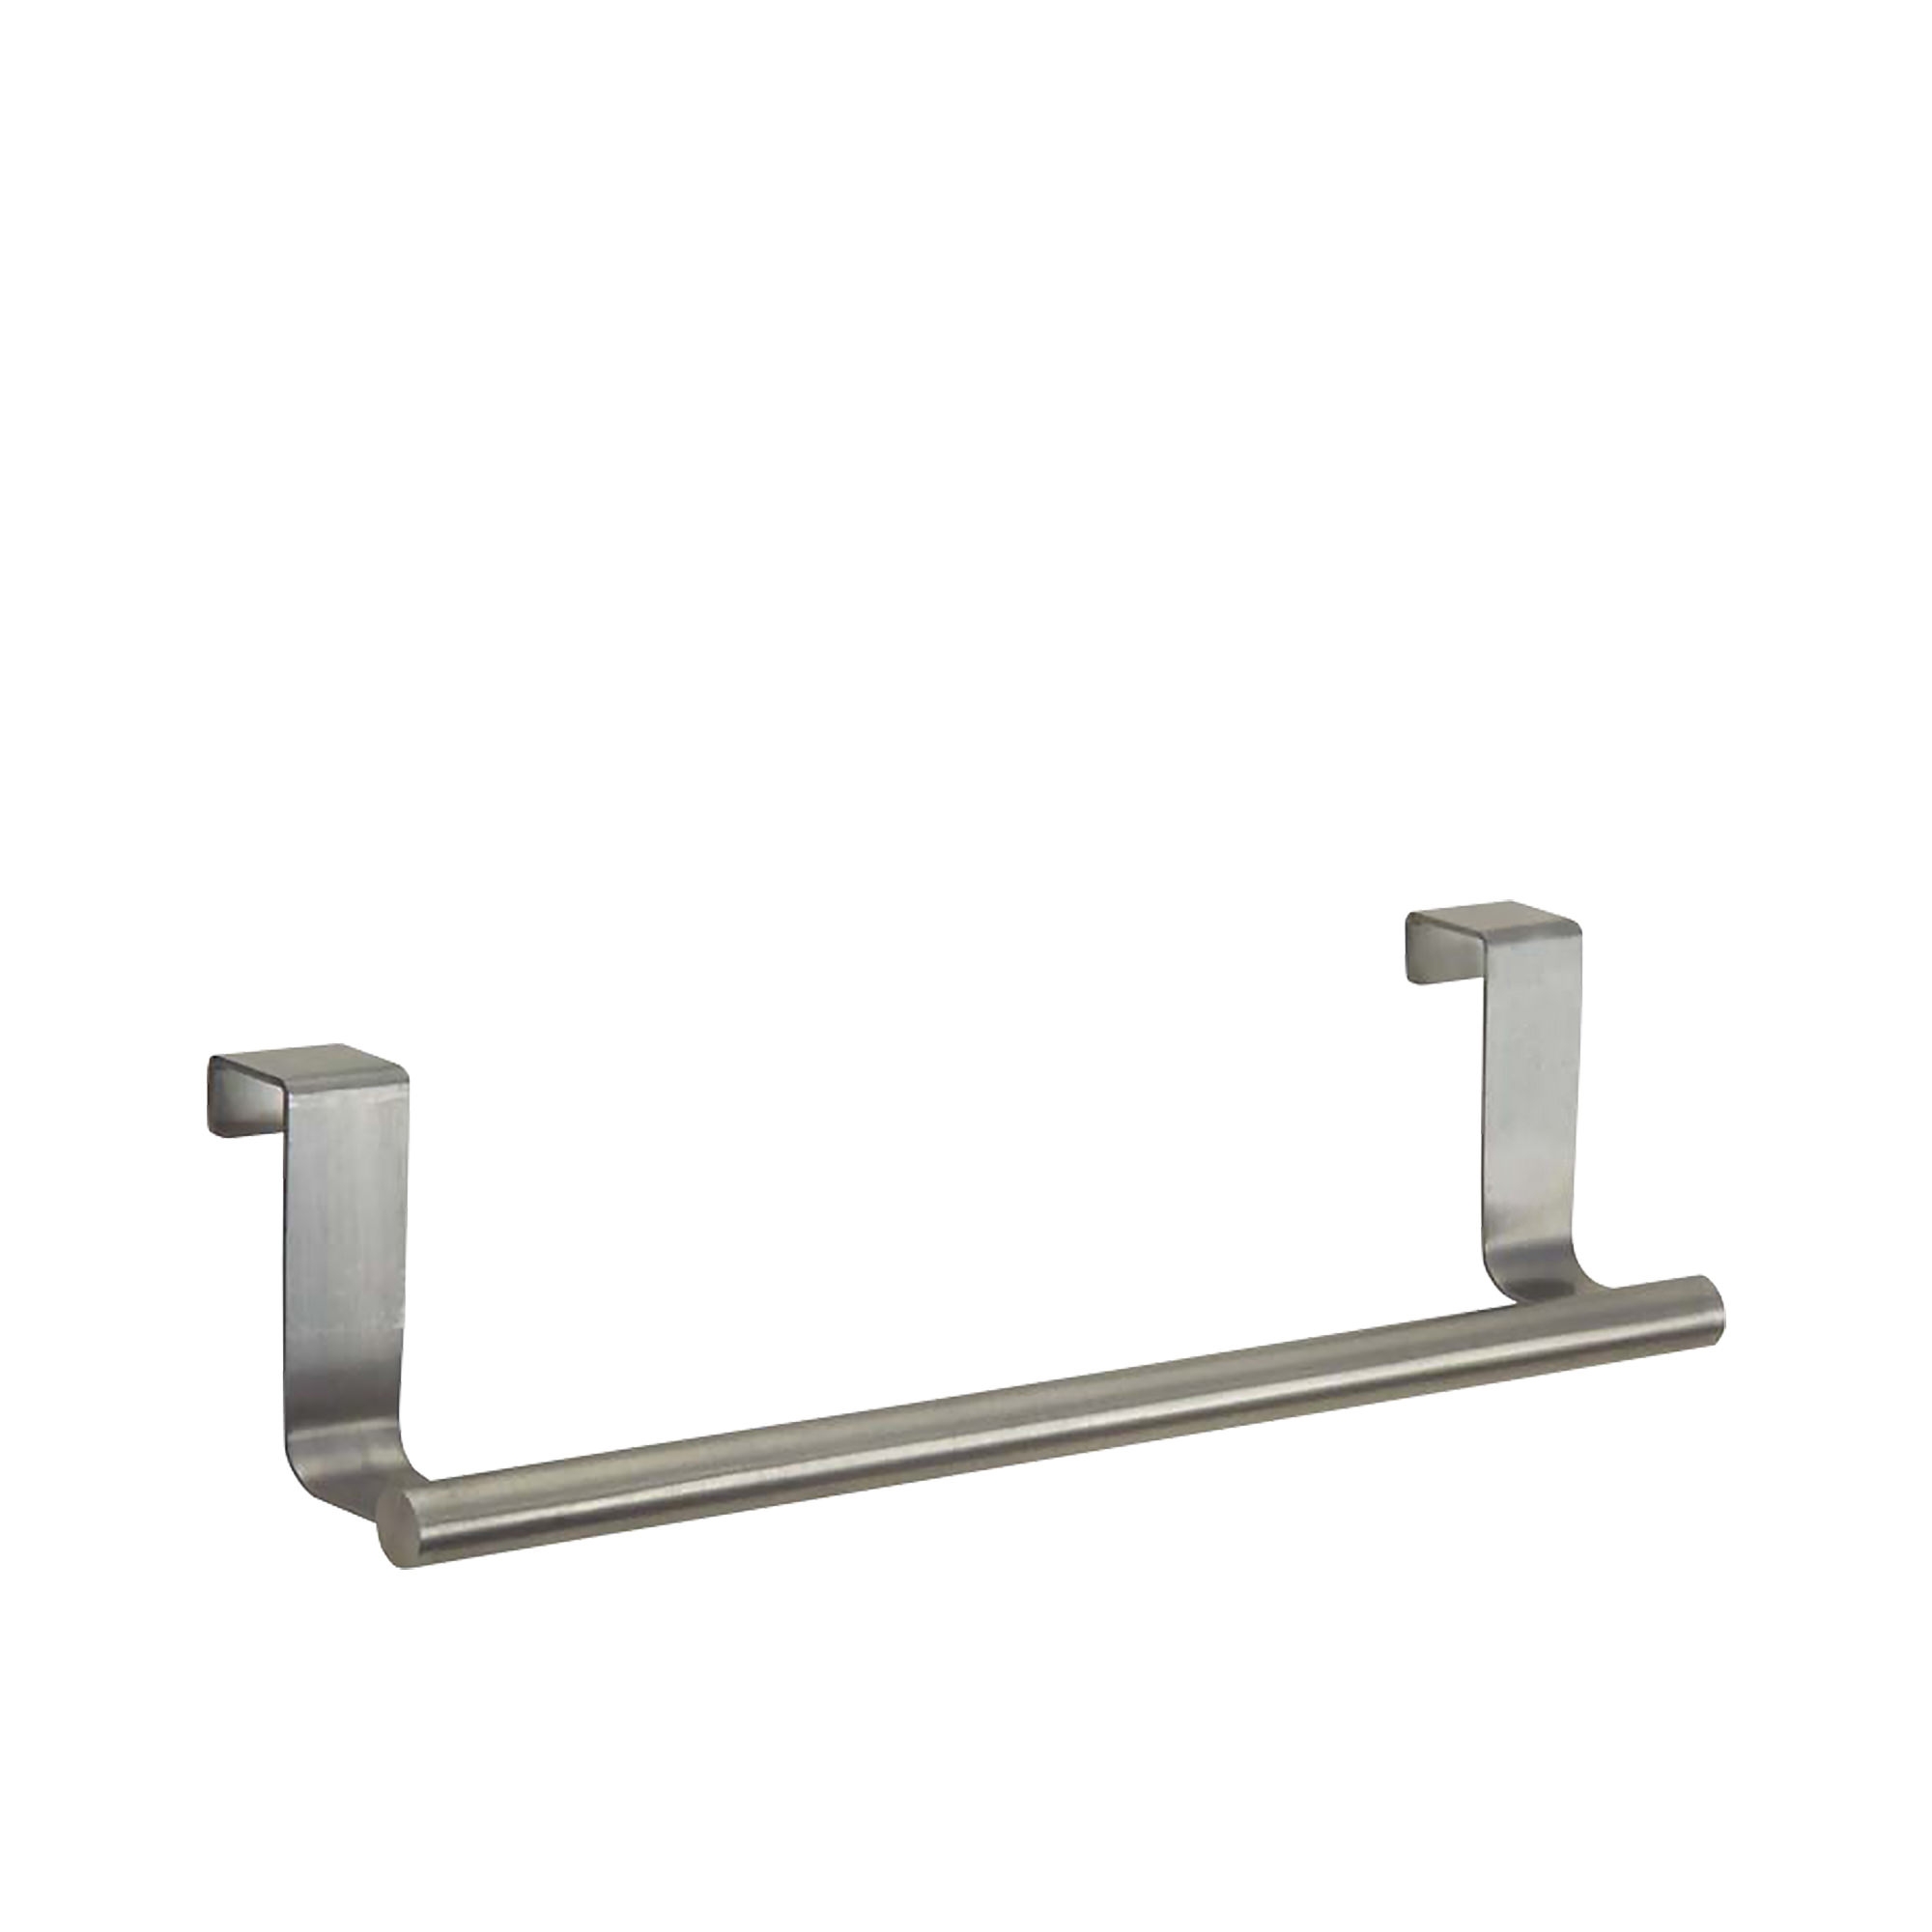 iDesign Forma Over The Cabinet Towel Bar 23x6cm Steel Image 1